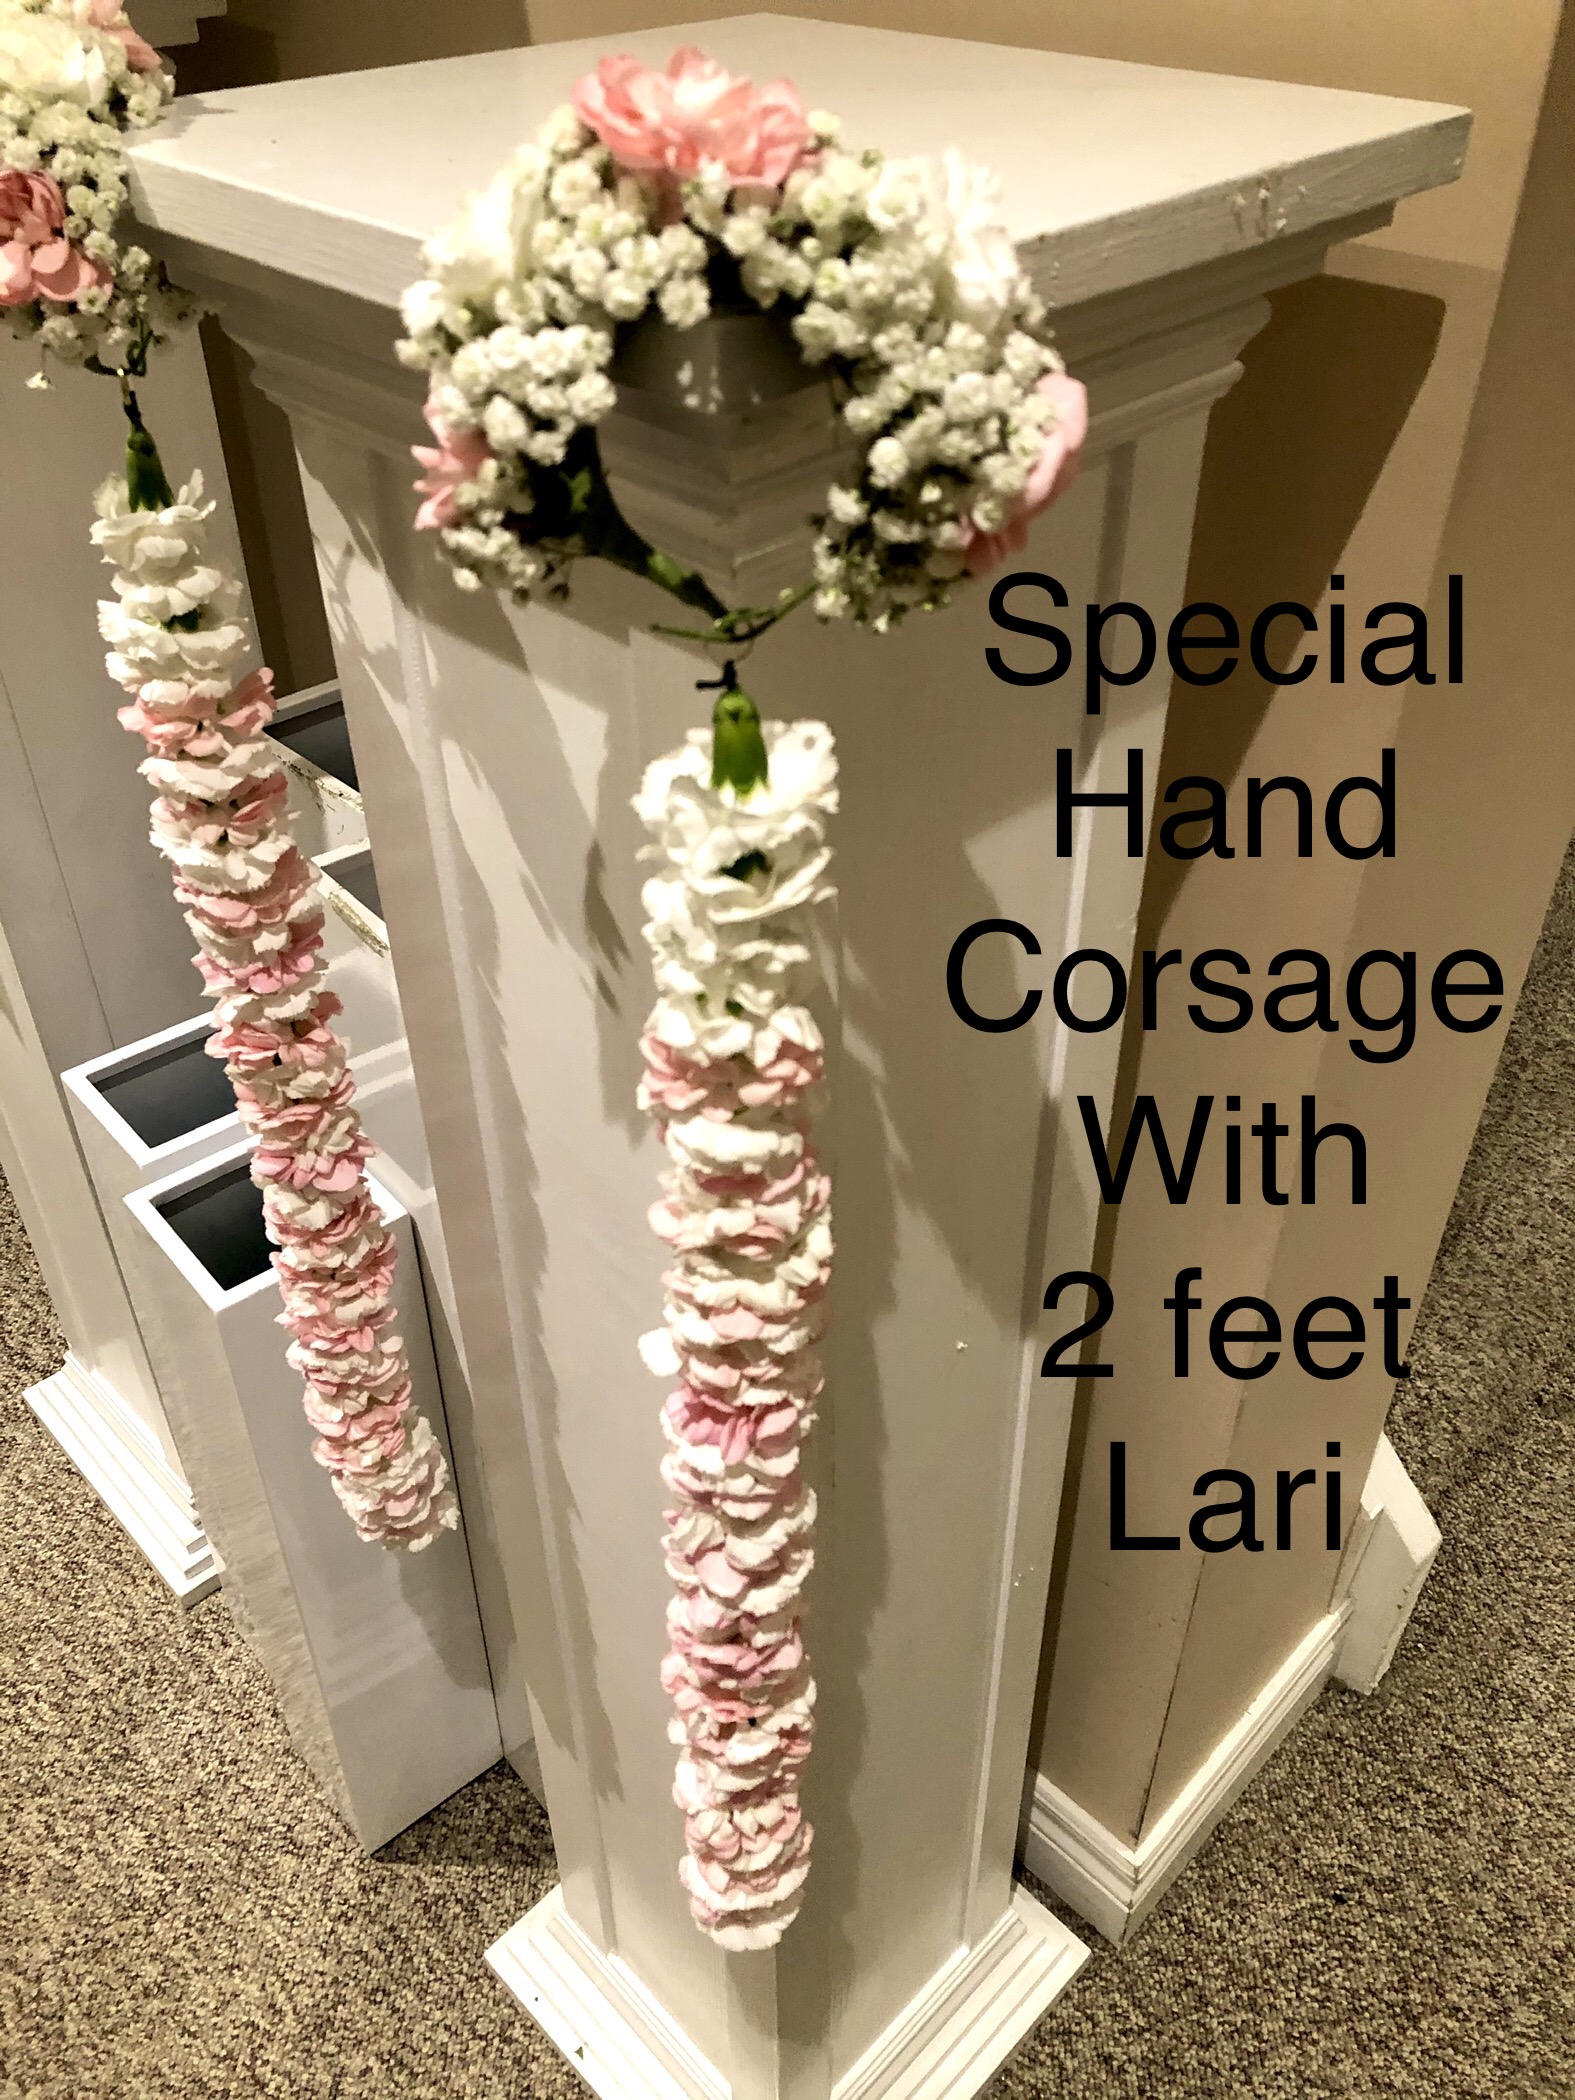 Special Hand Corsage with 2 feet lari $60